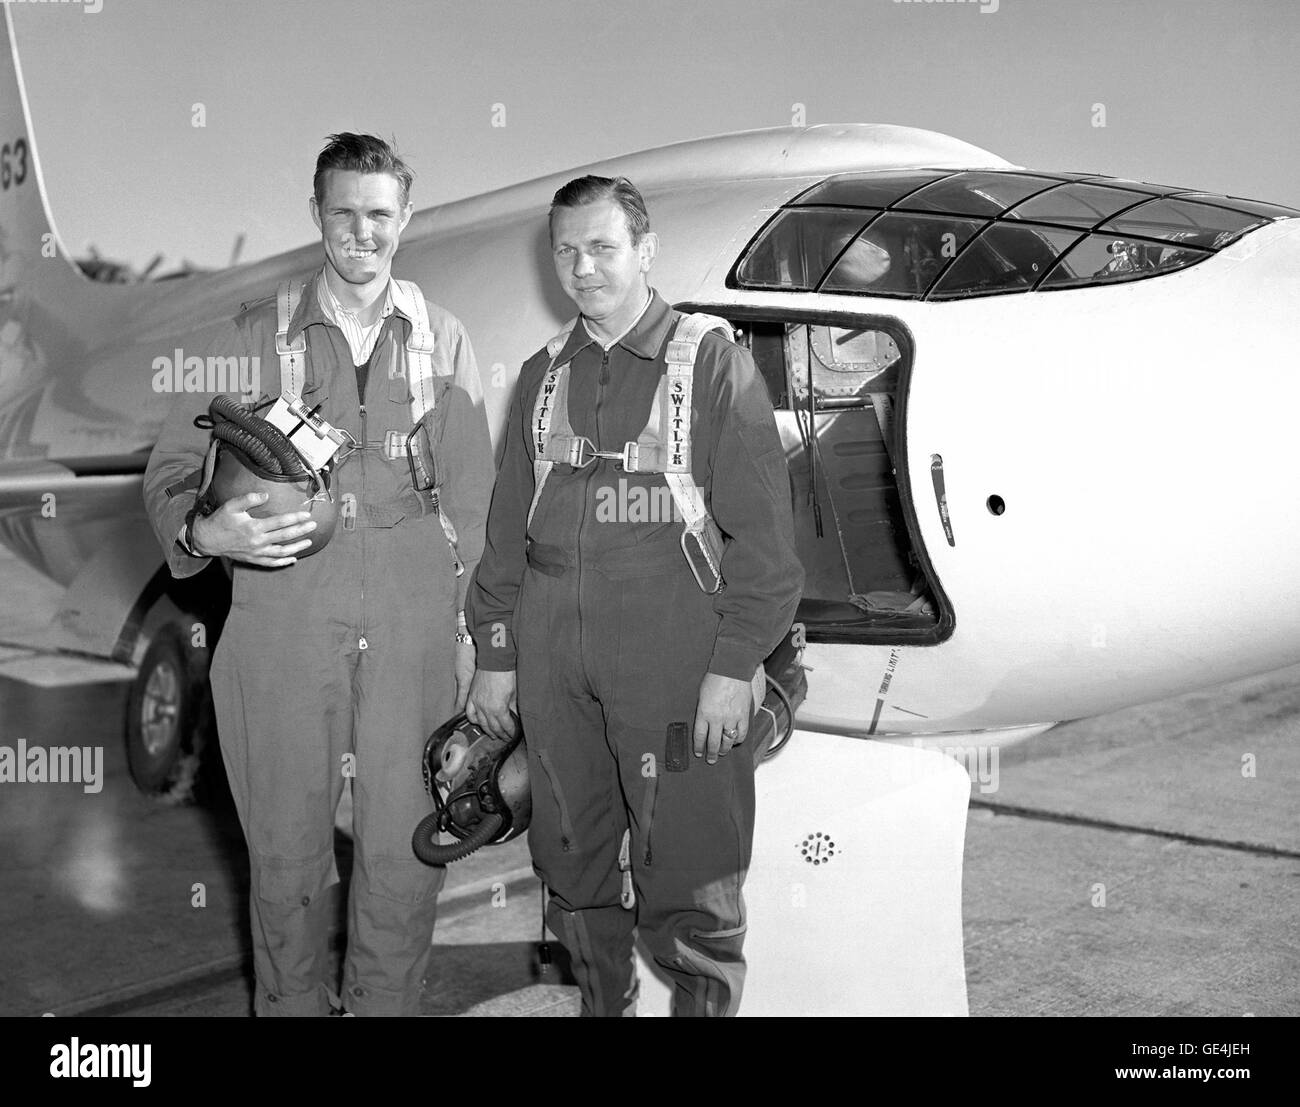 (September 1, 1949) The Bell Aircraft Corporation X-1-2 and two of the NACA pilots that flew the aircraft. The one on the left is Robert Champine with the other being Herbert Hoover. The X-1-2 was also equipped with the 10-percent wing and 8 percent tail, powered with an XLR-11 rocket engine and aircraft made its first powered flight on December 9, 1946 with Chalmers &quot;Slick&quot; Goodlin at the controls. As with the X-1-1 the X-1-2 continued to investigate transonic/supersonic flight regime. NACA pilot Herbert Hoover became the first civilian to fly Mach 1, March 10, 1948. X-1-2 flew unti Stock Photo